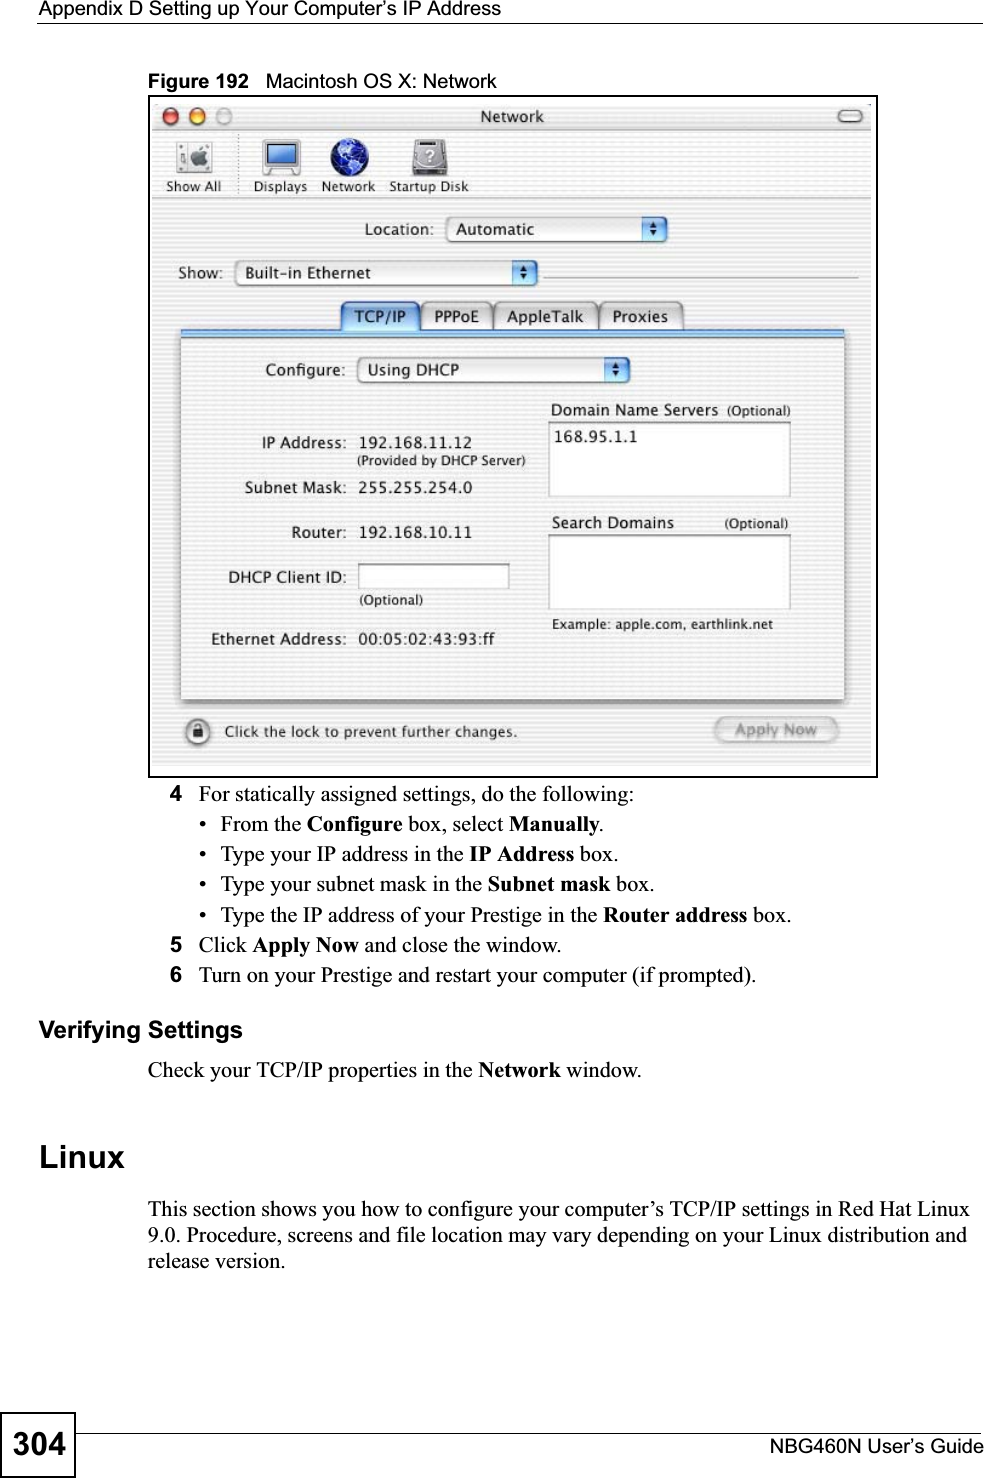 Appendix D Setting up Your Computer’s IP AddressNBG460N User’s Guide304Figure 192   Macintosh OS X: Network4For statically assigned settings, do the following:•From the Configure box, select Manually.• Type your IP address in the IP Address box.• Type your subnet mask in the Subnet mask box.• Type the IP address of your Prestige in the Router address box.5Click Apply Now and close the window.6Turn on your Prestige and restart your computer (if prompted).Verifying SettingsCheck your TCP/IP properties in the Network window.LinuxThis section shows you how to configure your computer’s TCP/IP settings in Red Hat Linux 9.0. Procedure, screens and file location may vary depending on your Linux distribution and release version. 